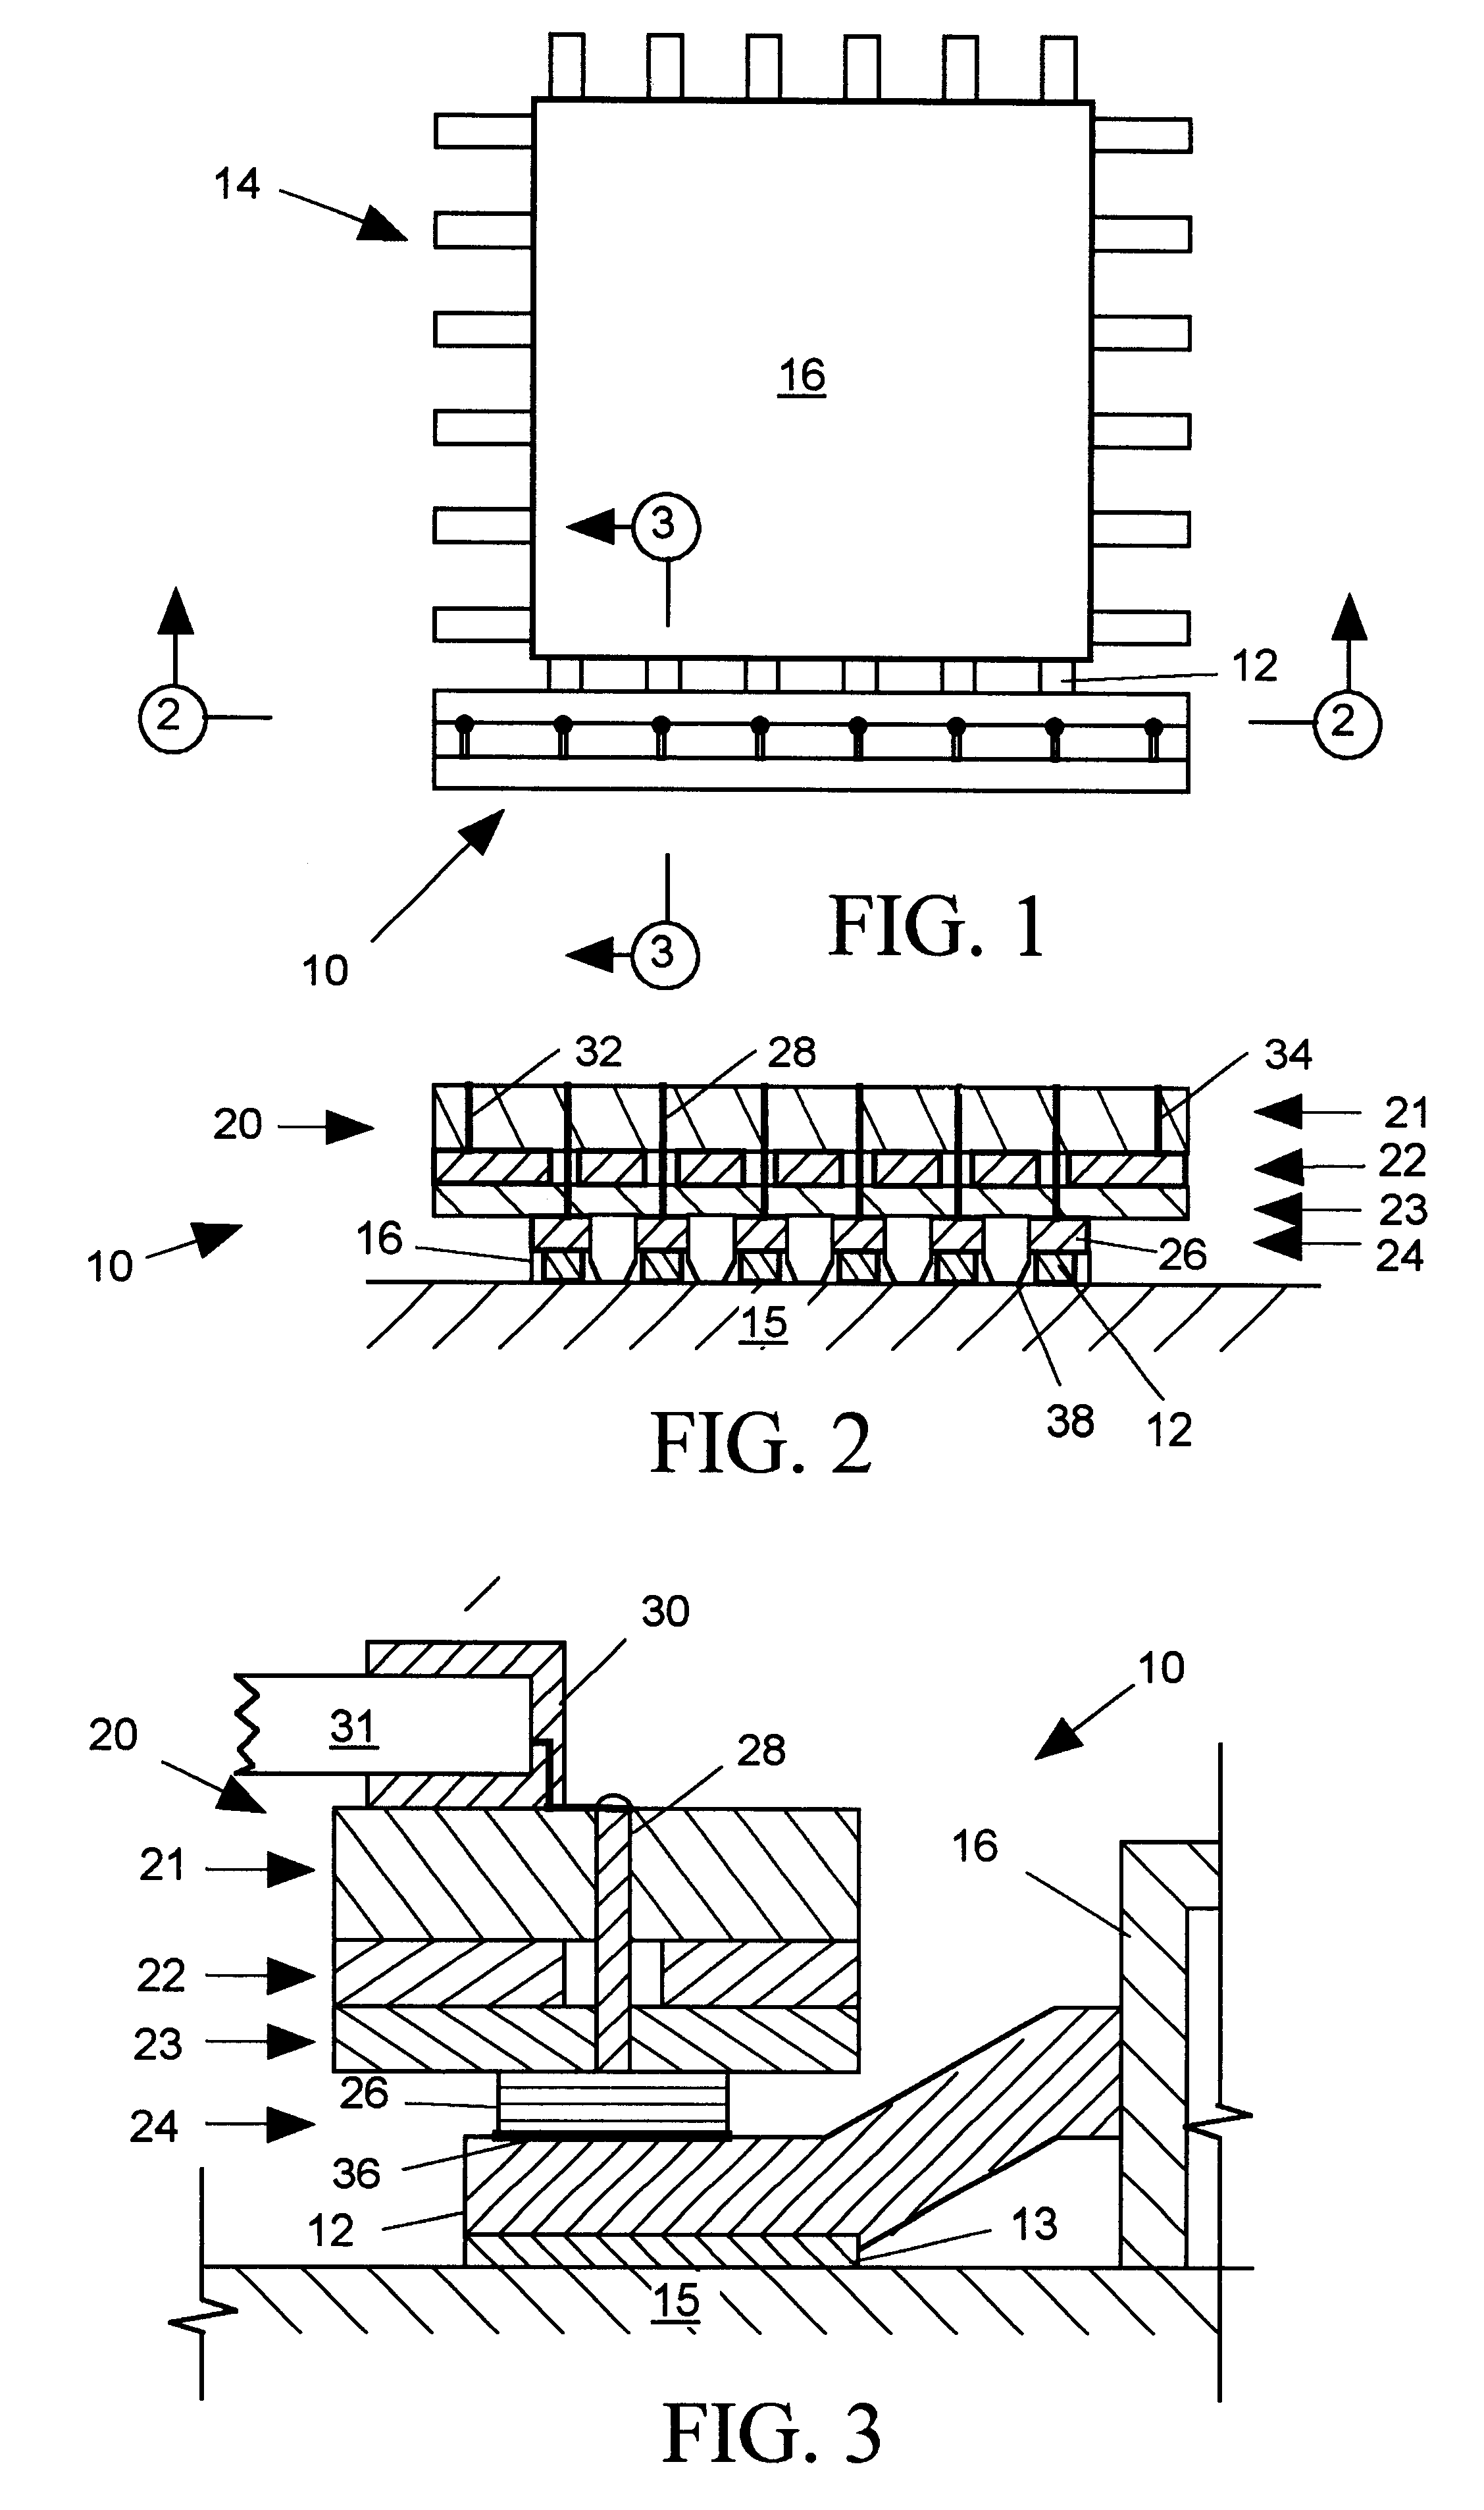 Self-soldering integrated circuit probe assembly